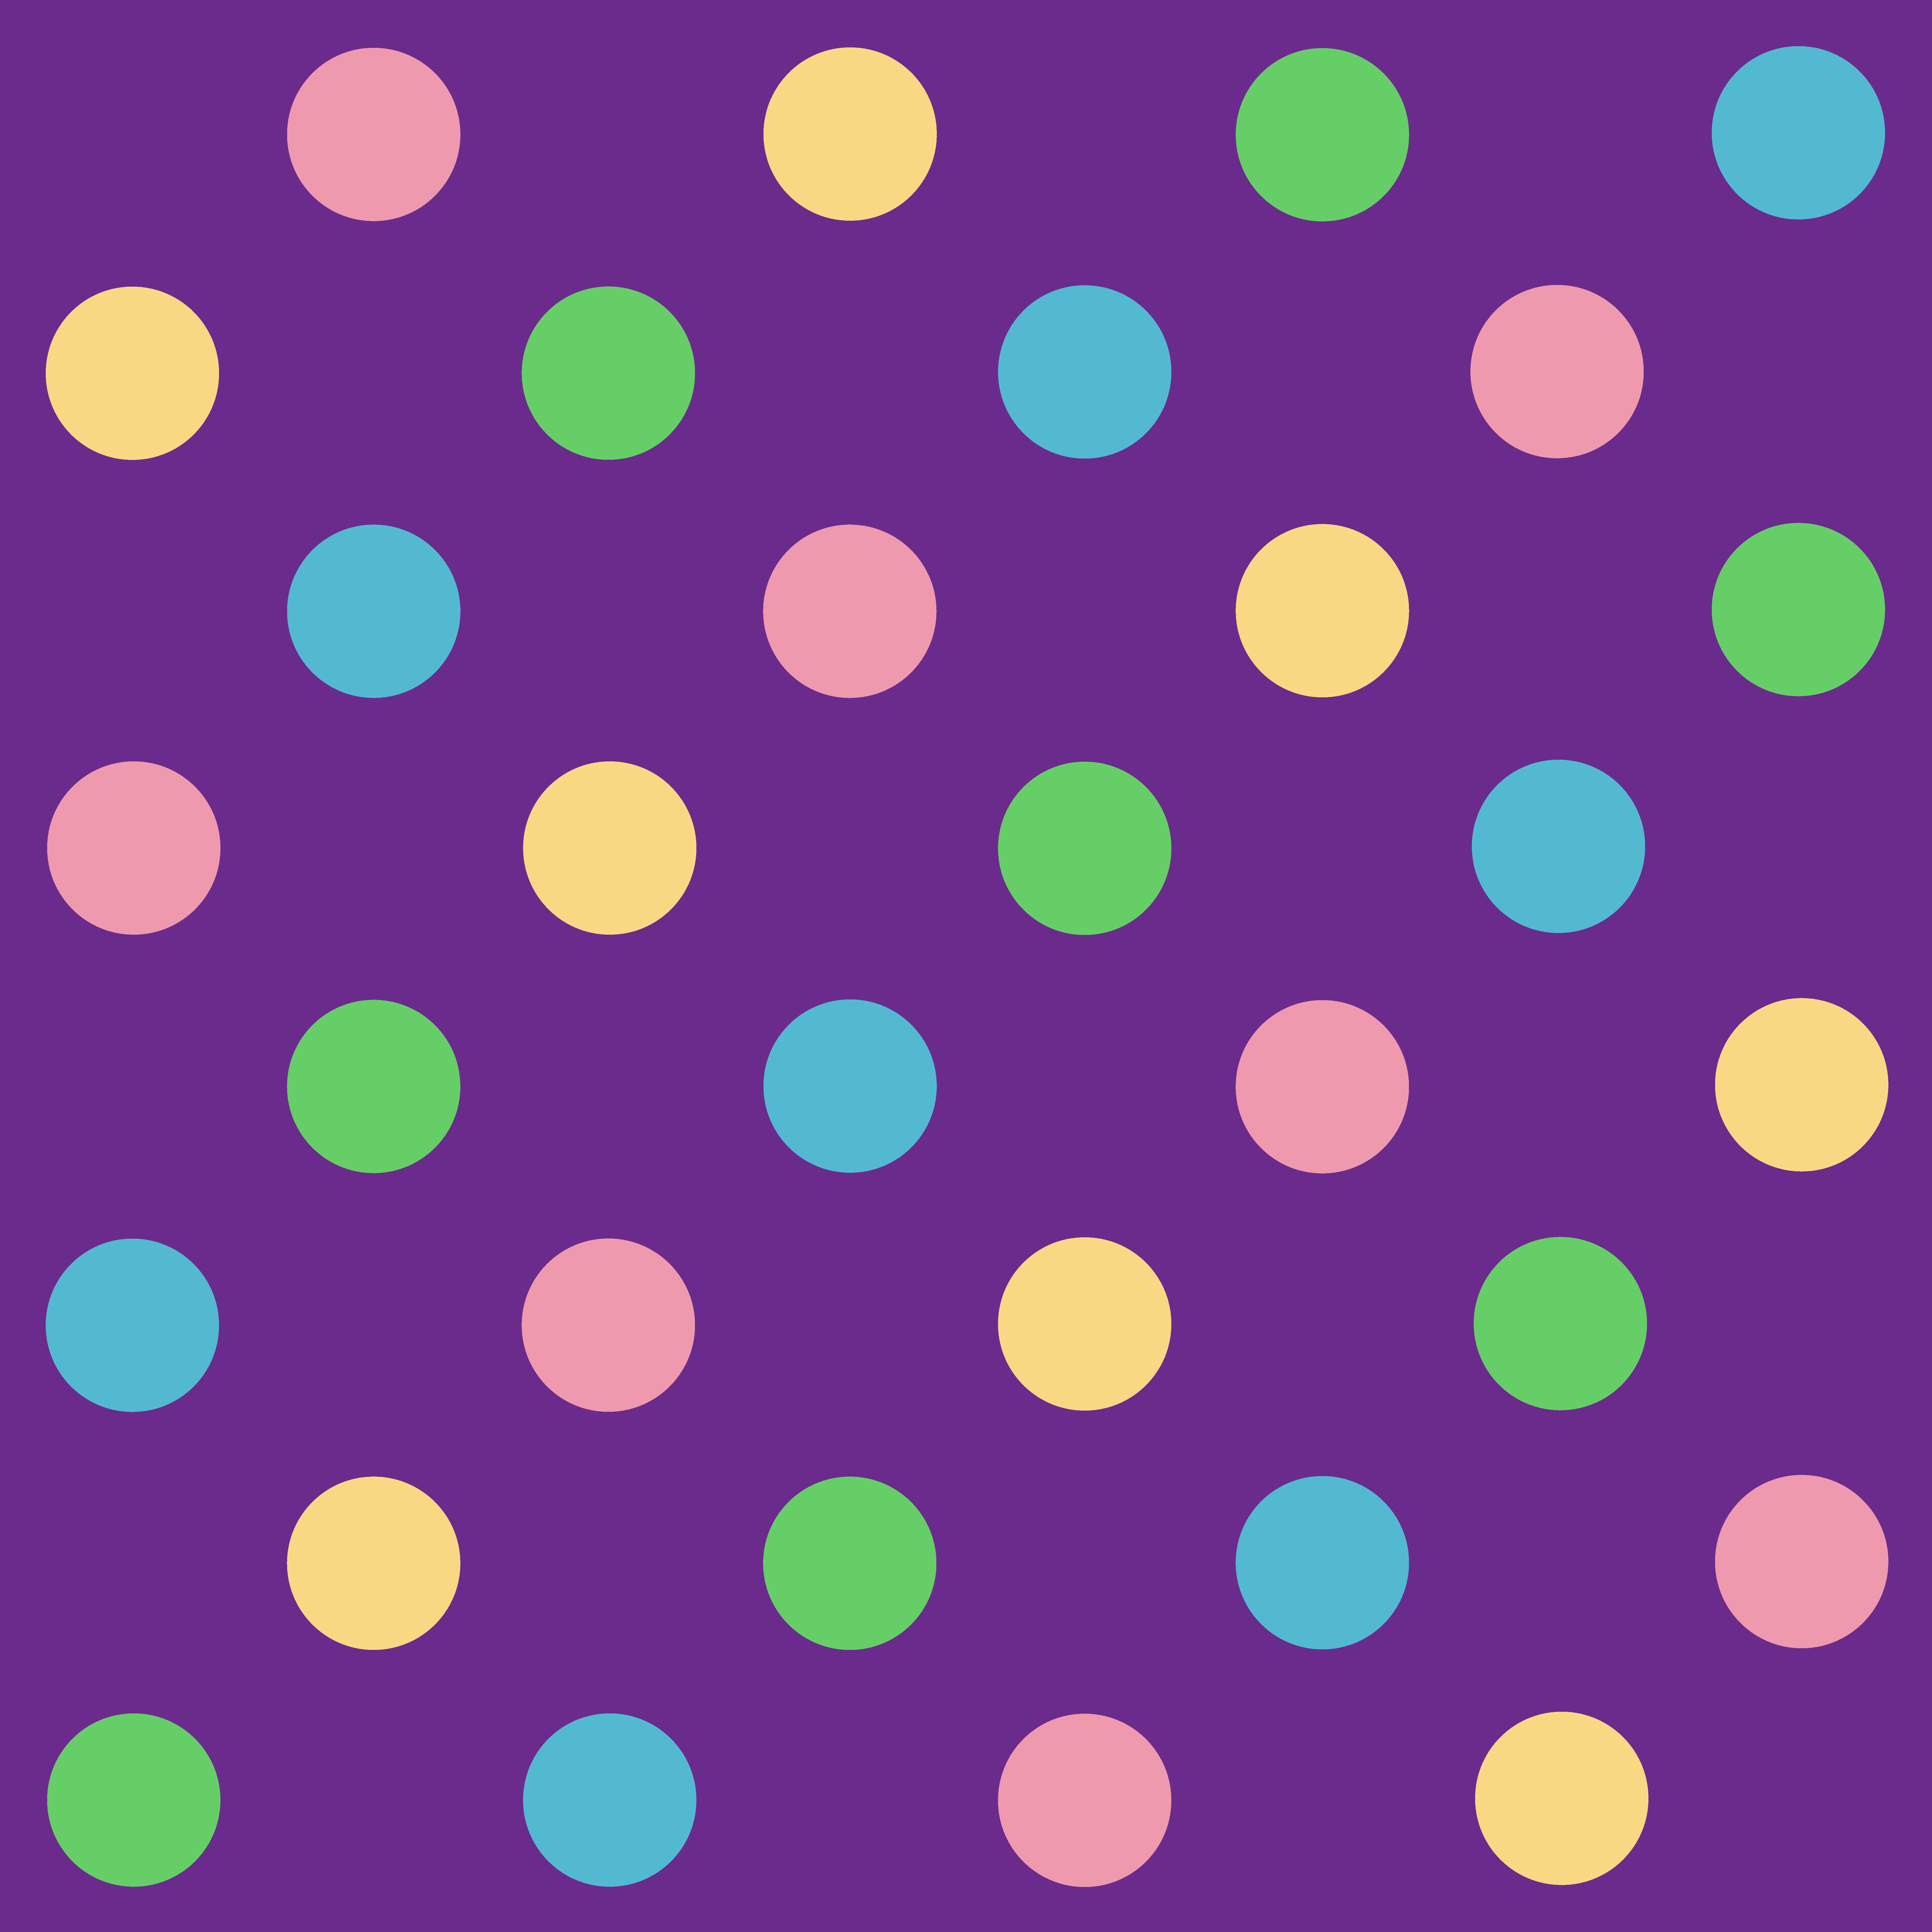 Pastel clipart polka dot background and in color pastel